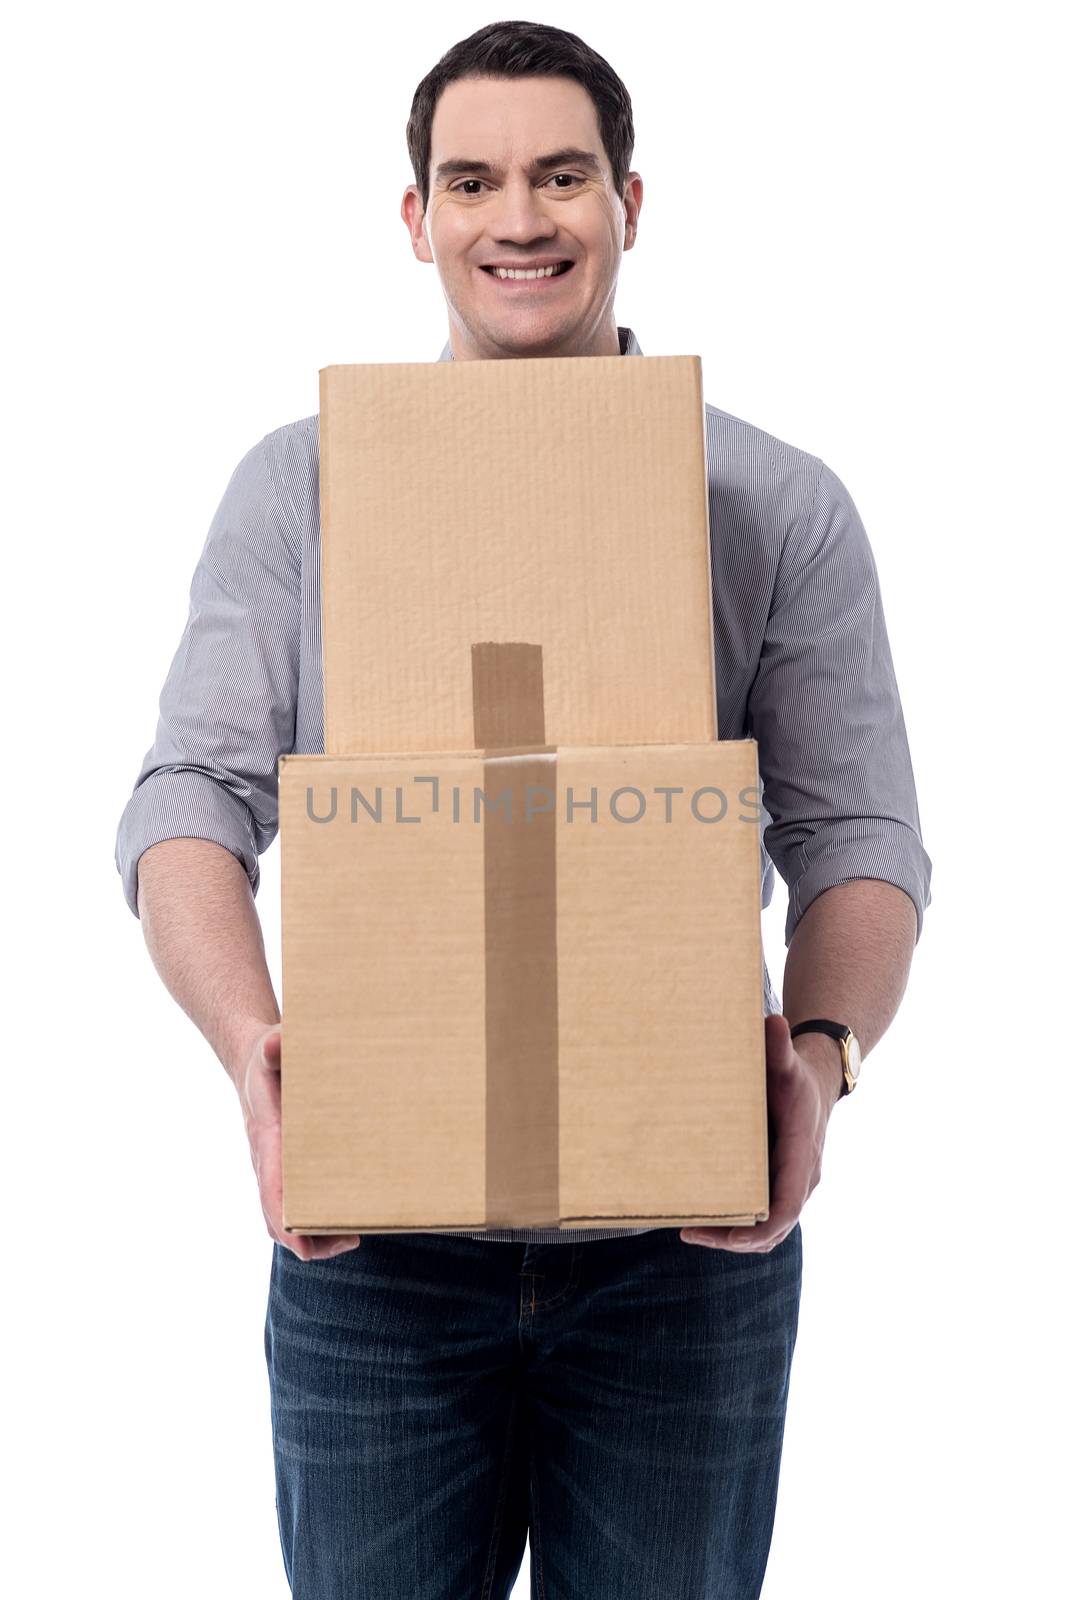 Just now got my parcels. by stockyimages